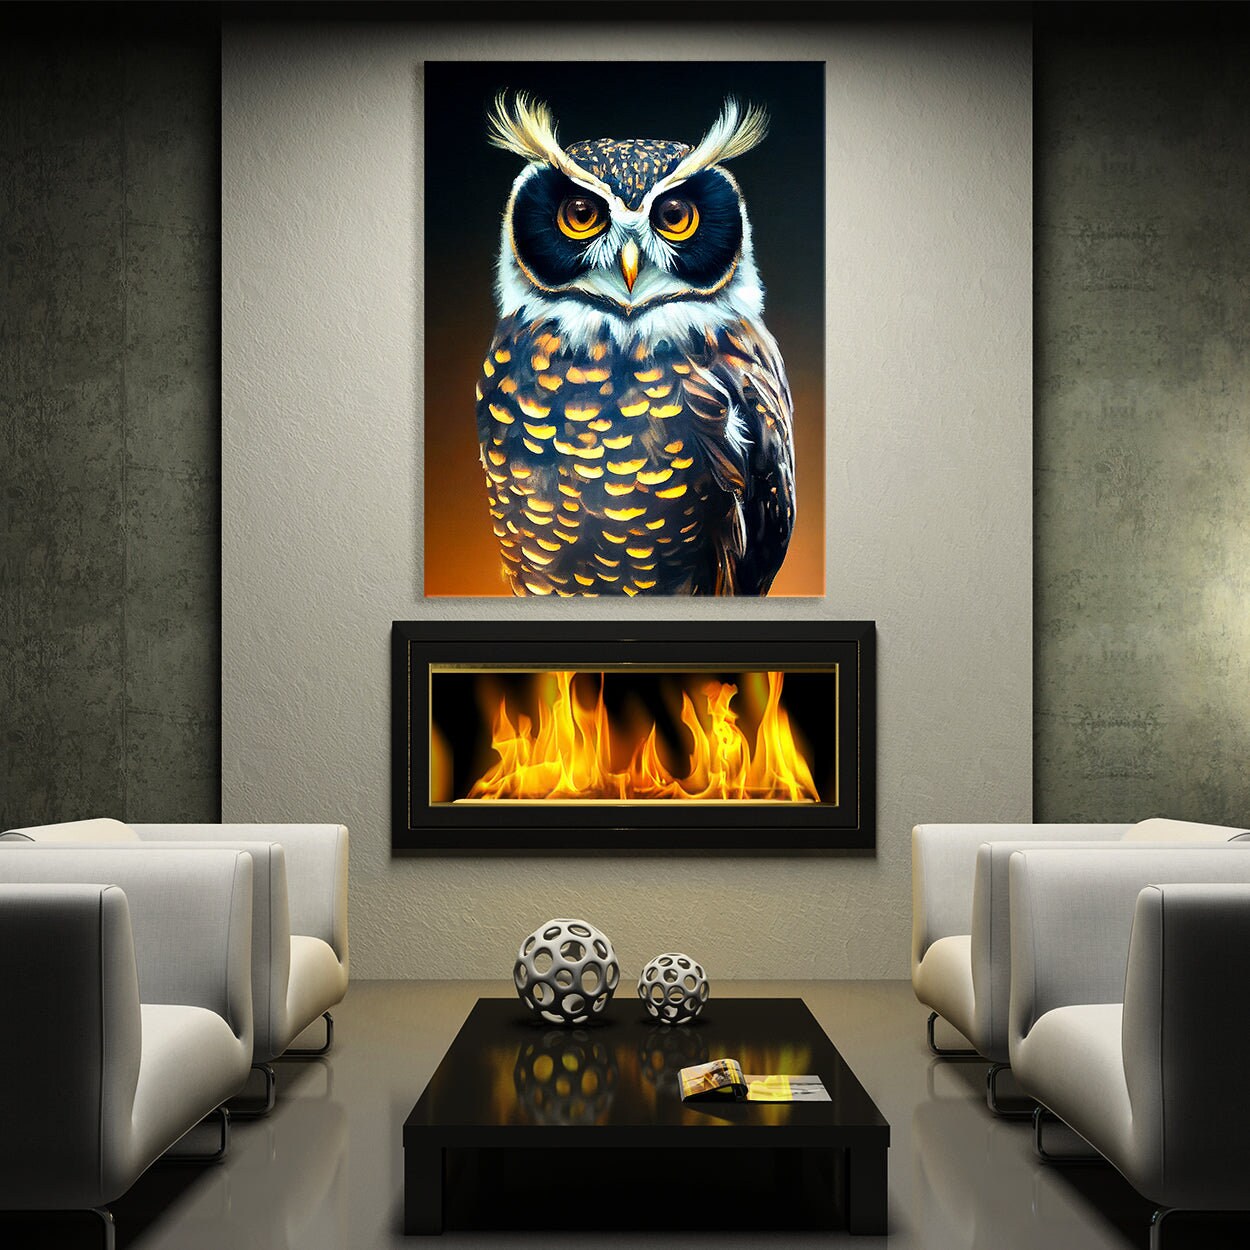 Wall26 Canvas Wall Art Isolated Flying Owl Canvas Painting Wall Poster Decor for Living Room Framed Home Decorations, Size: 12 x 18